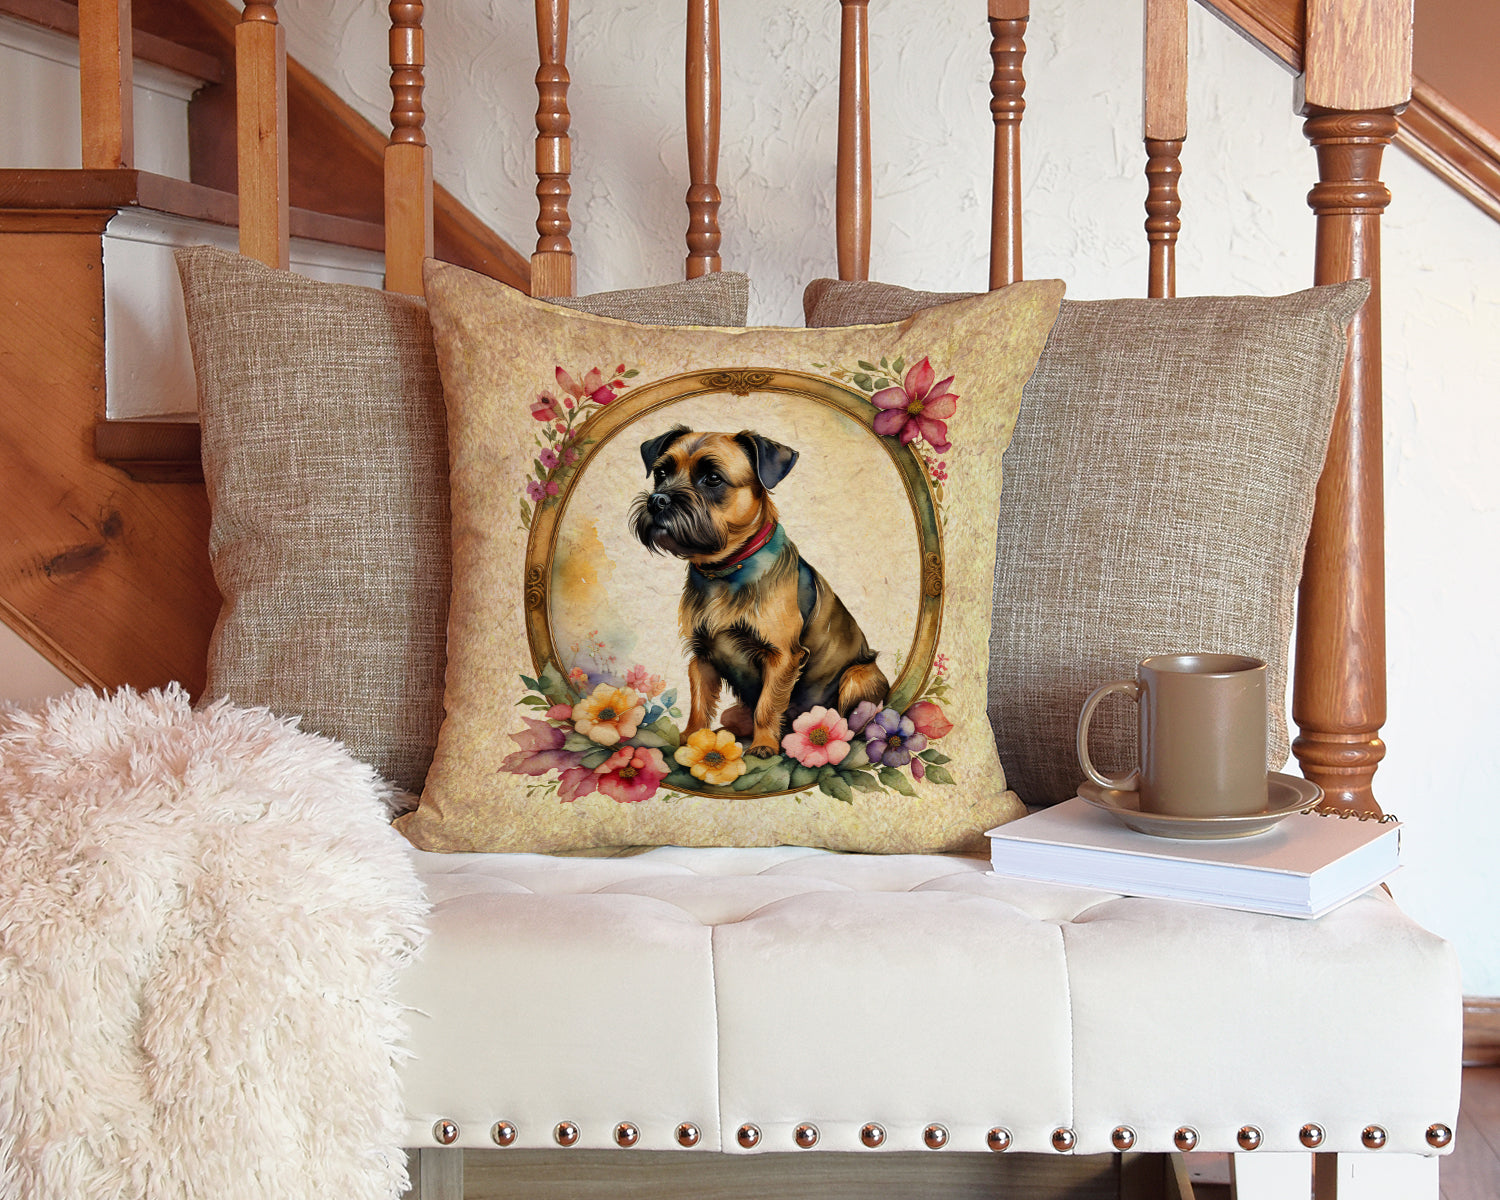 Border Terrier and Flowers Fabric Decorative Pillow